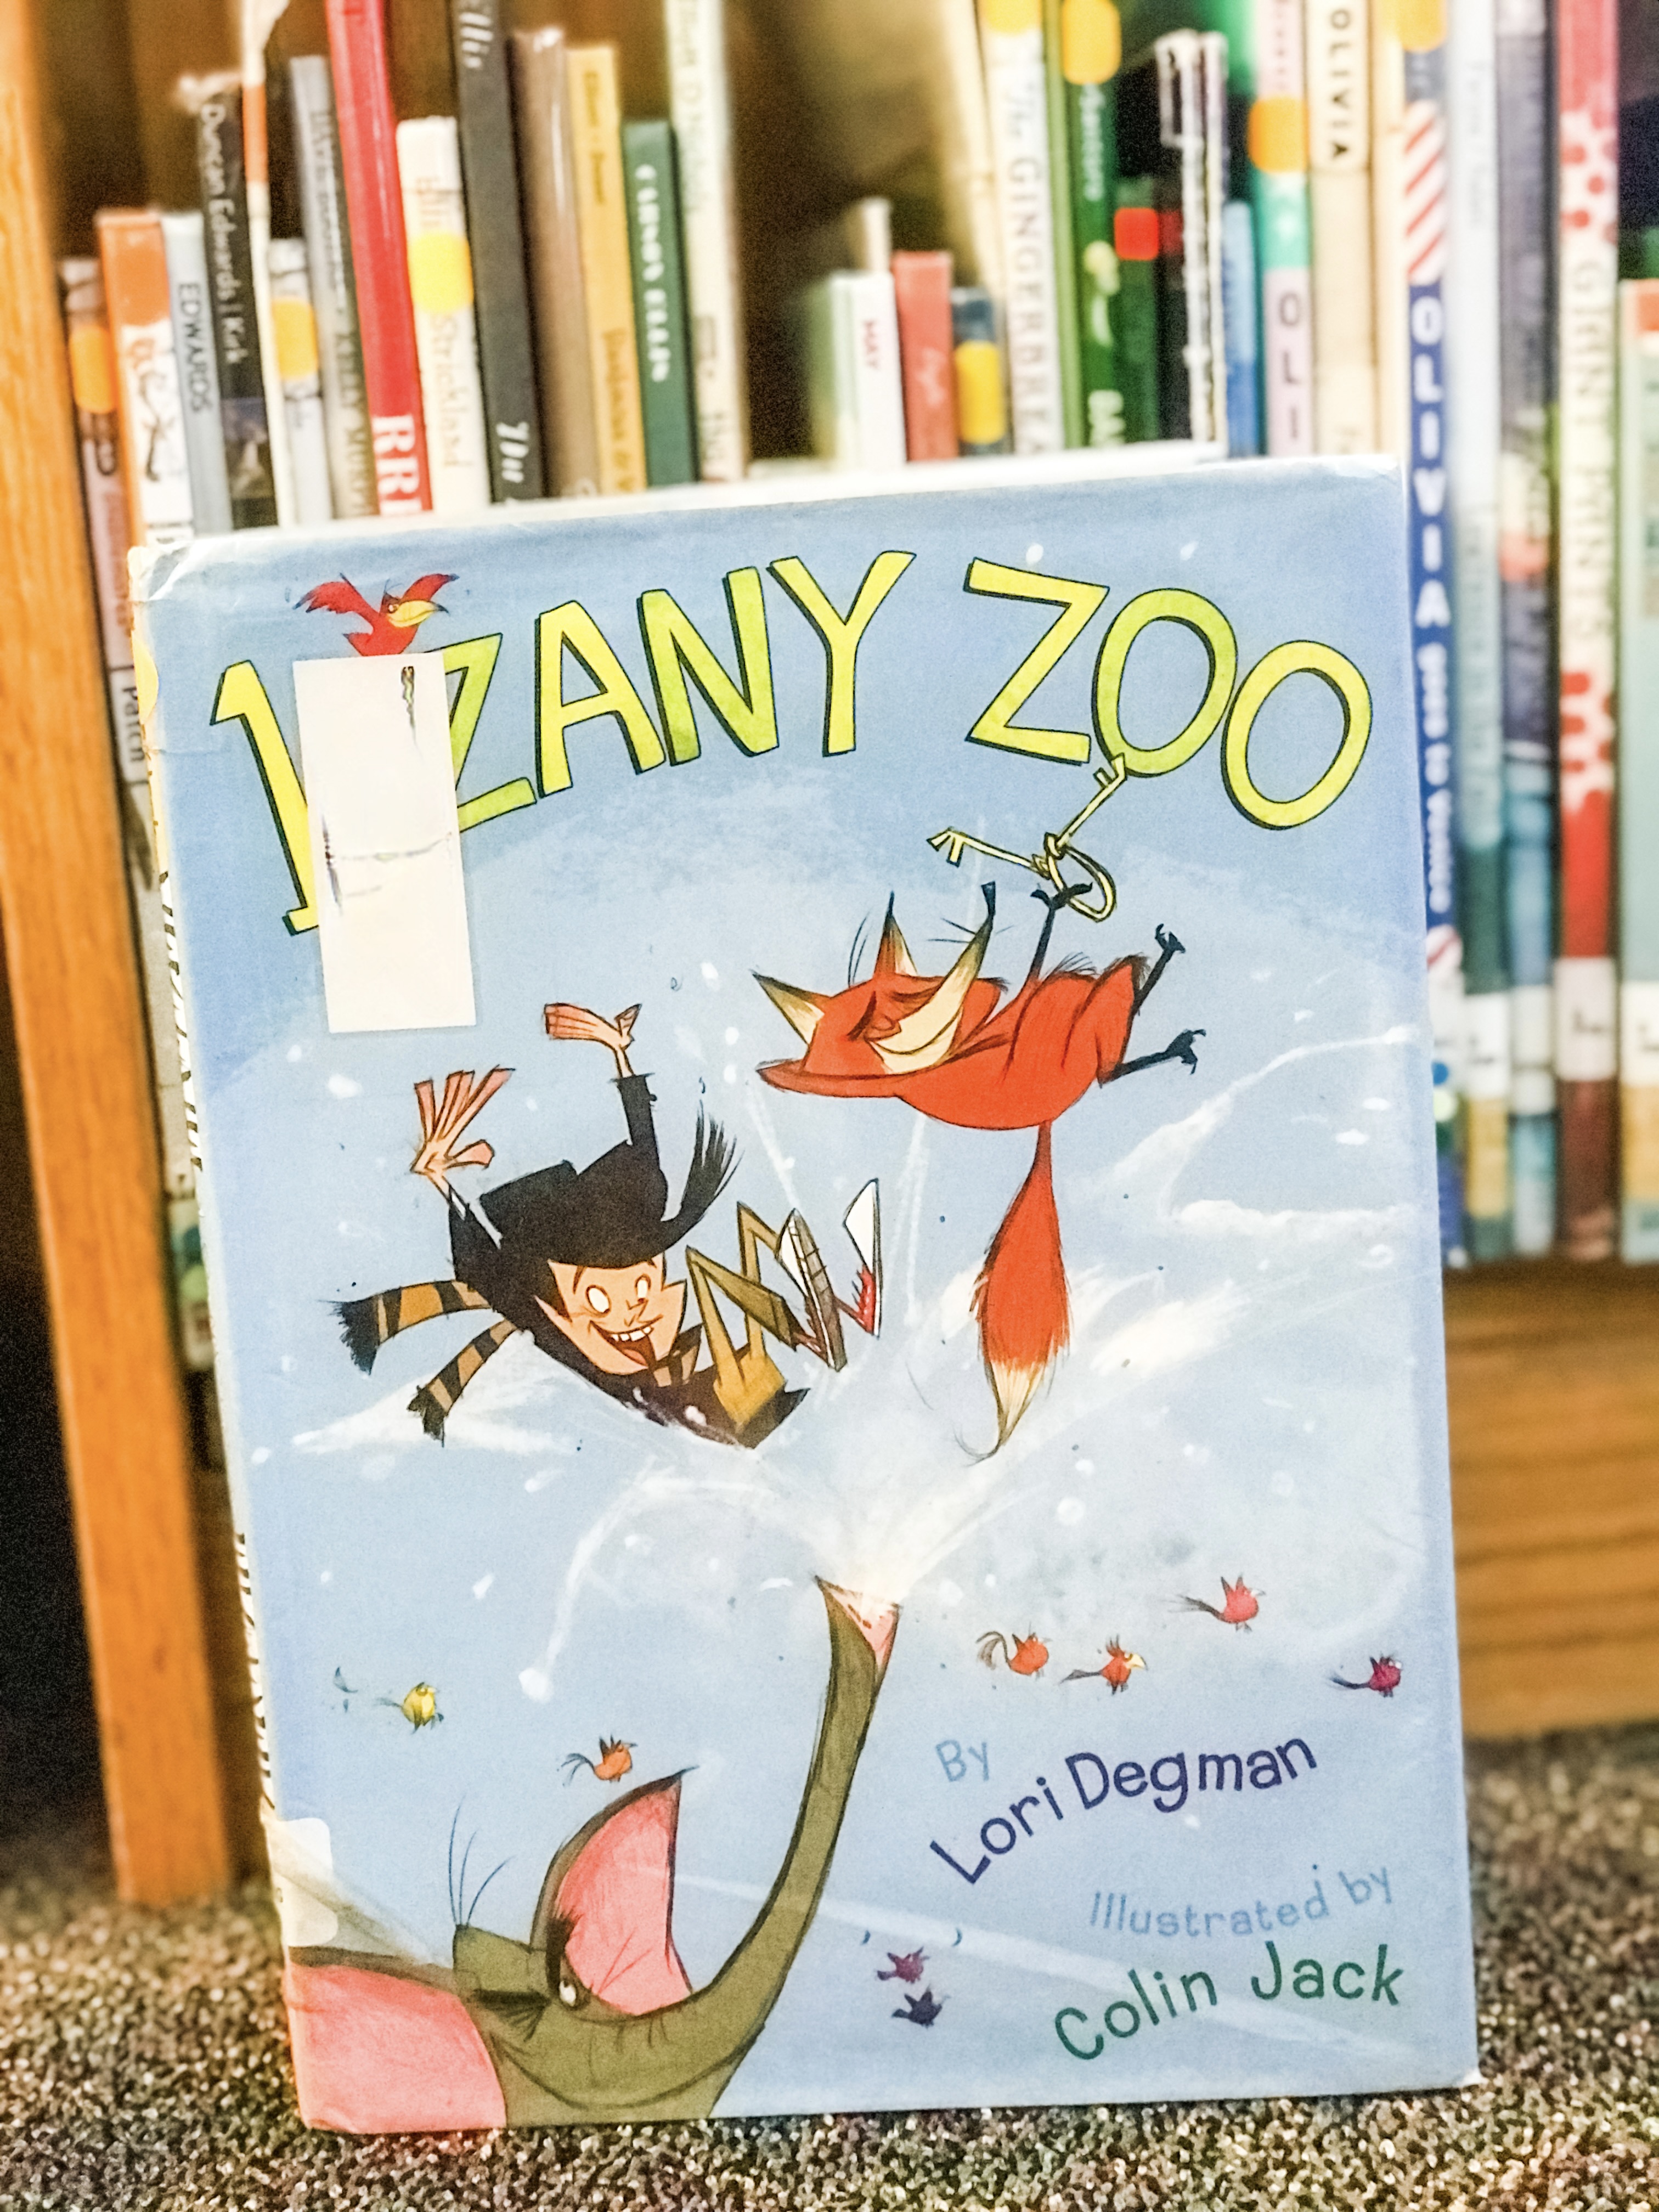 counting book - 1 Zany Zoo